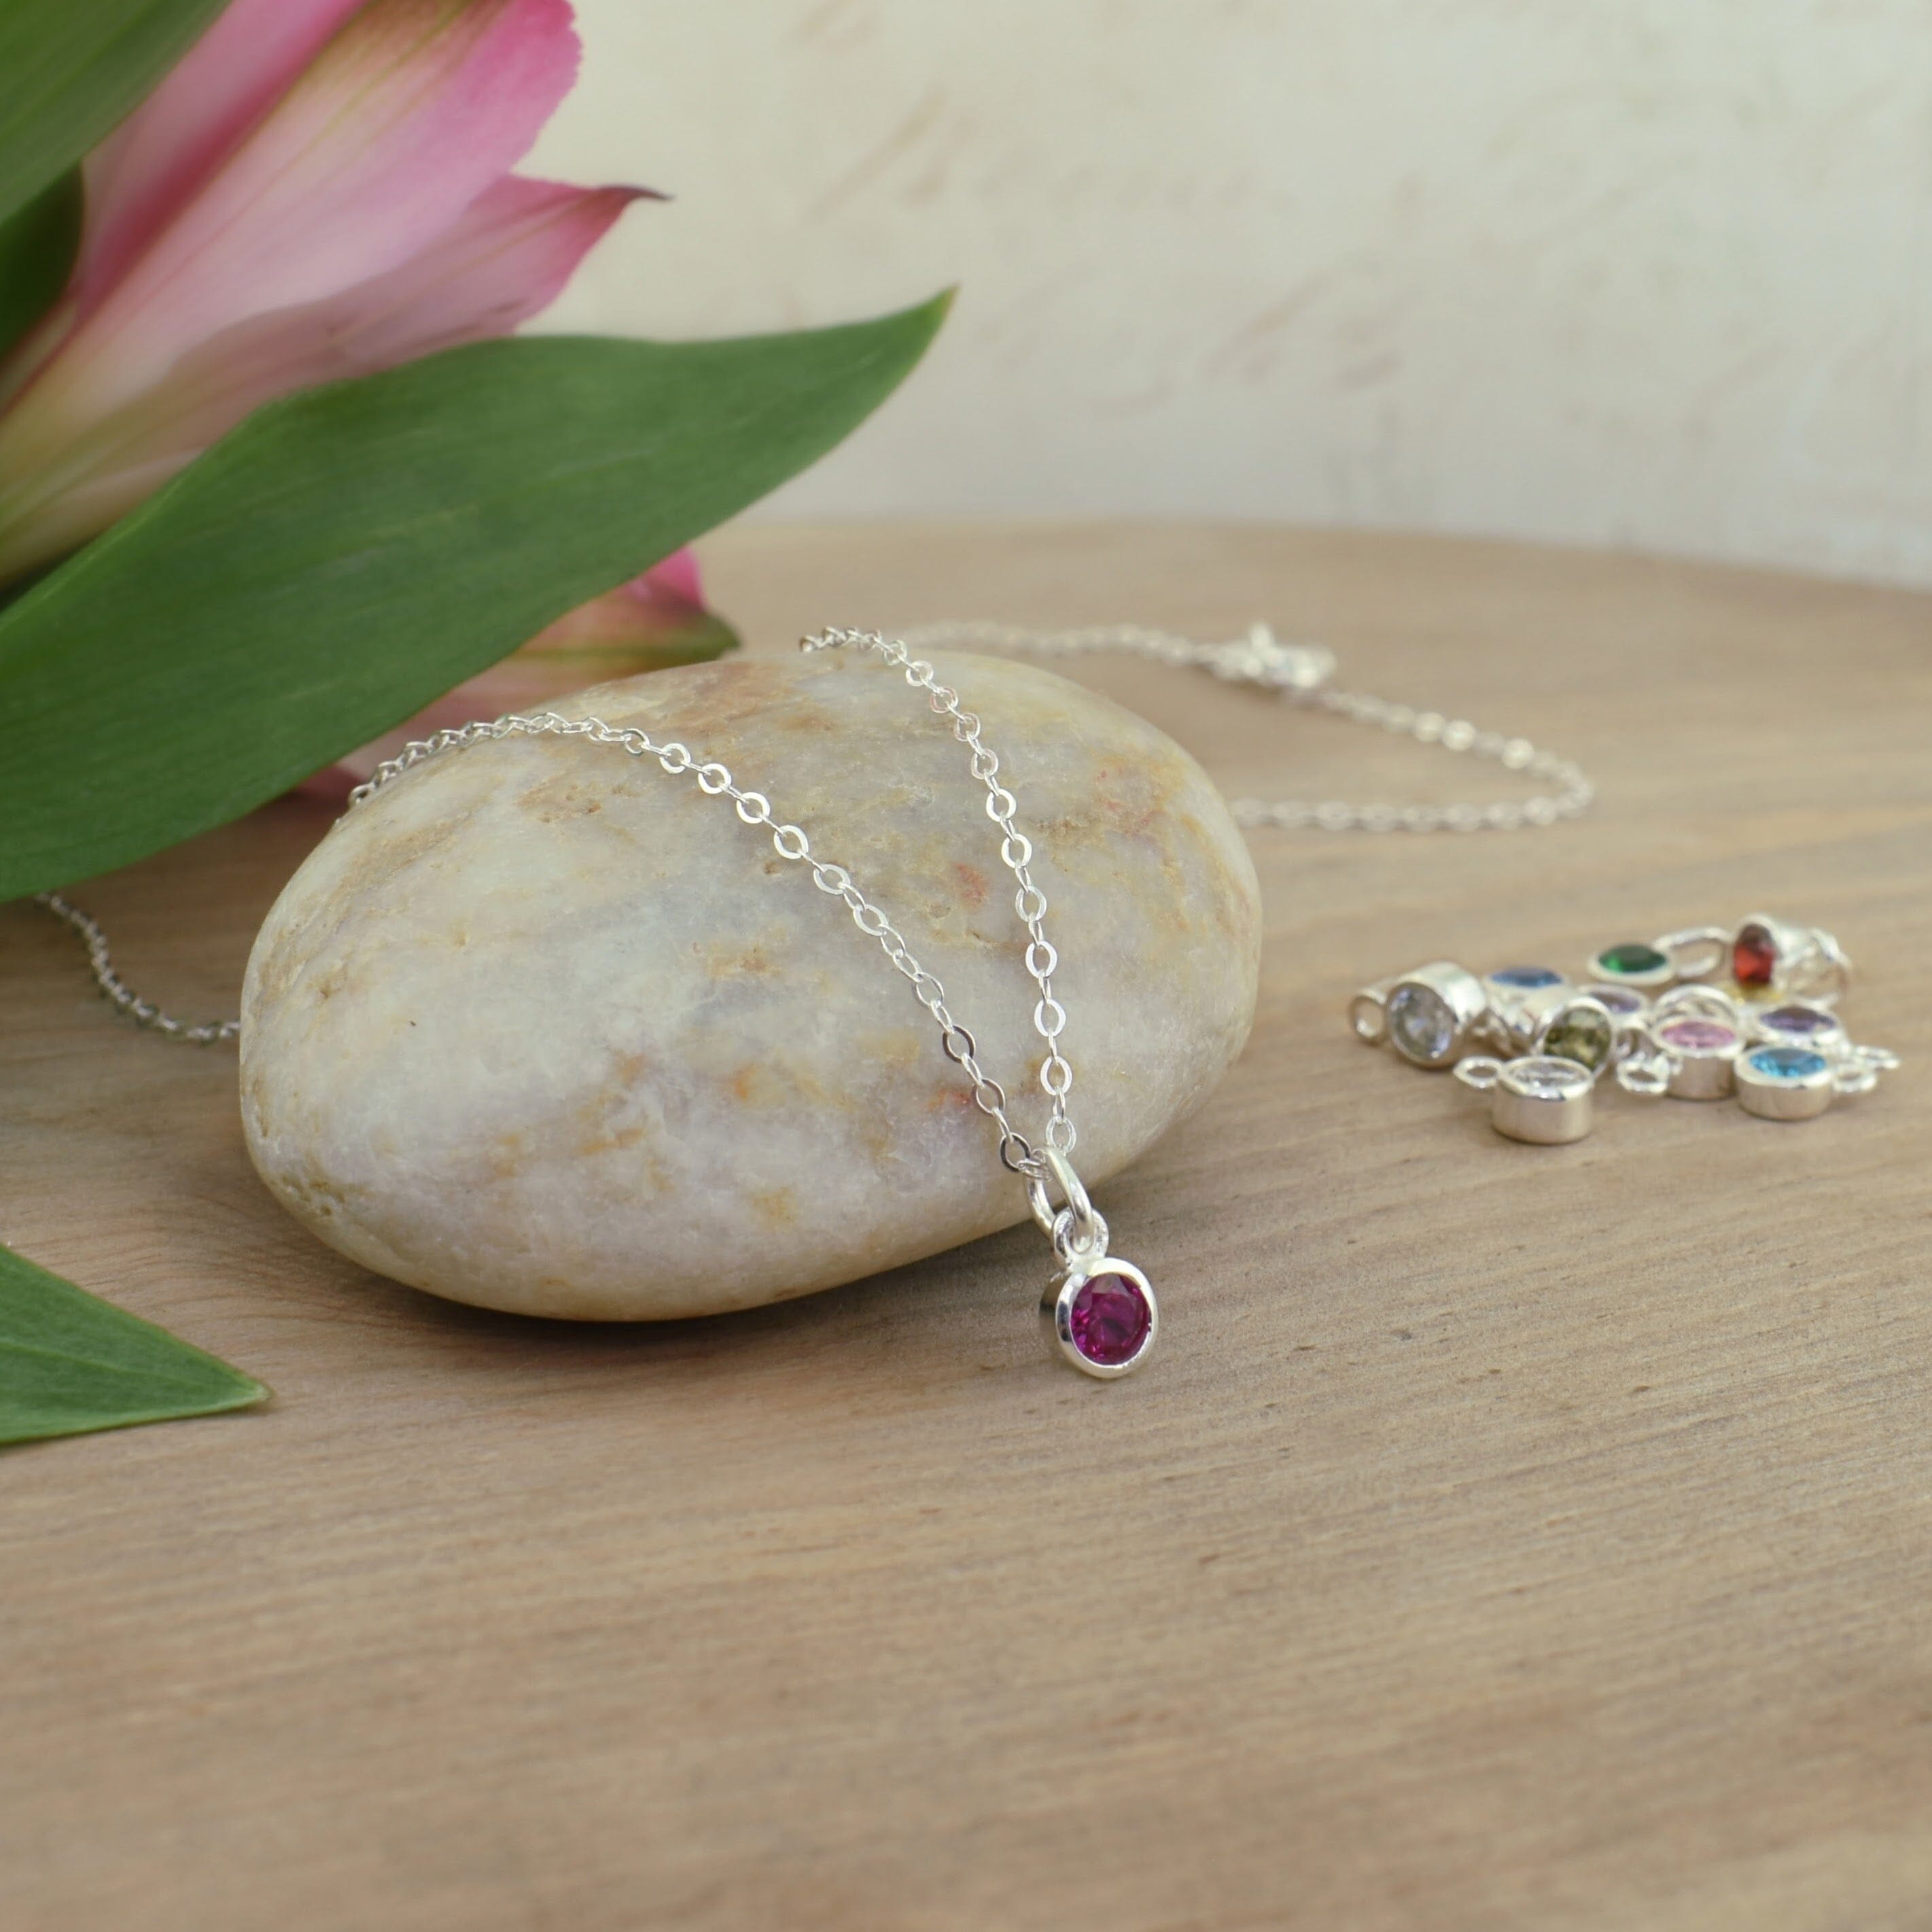 dainty sterling silver necklace featuring a birthstone